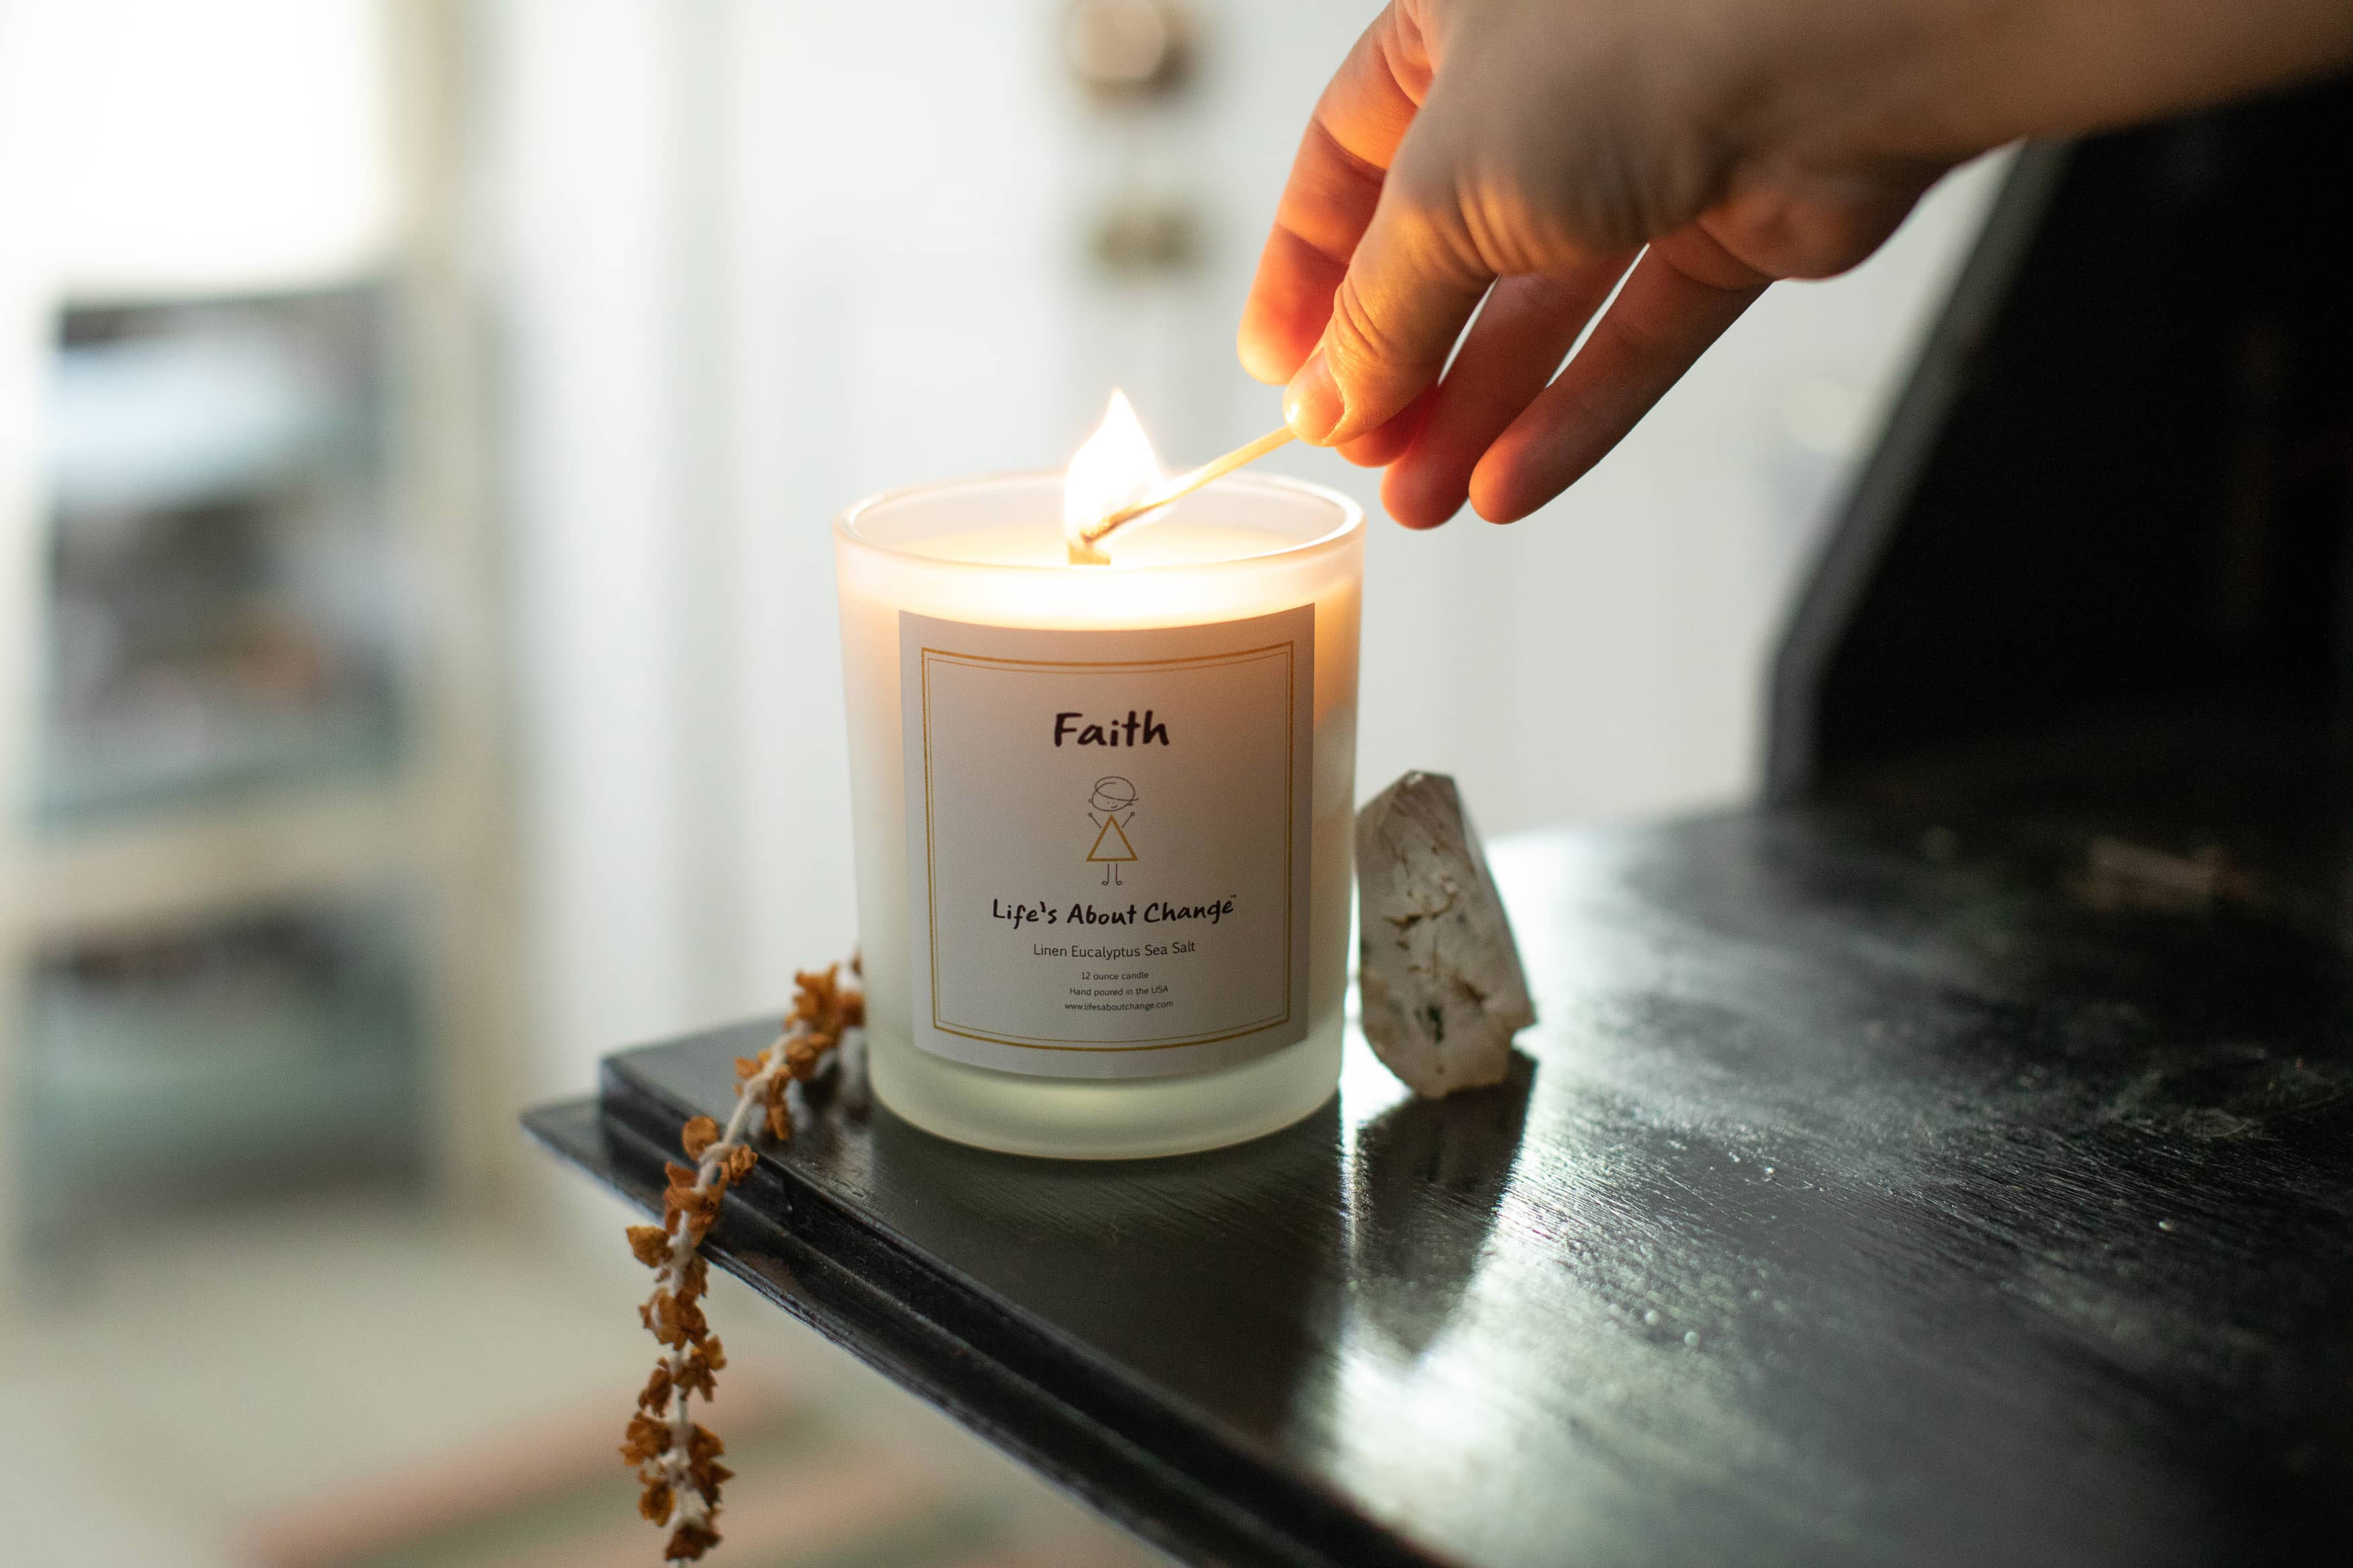 Faith Linen Eucalyptus Sea Salt Candles from Life's About Change Delta Collection